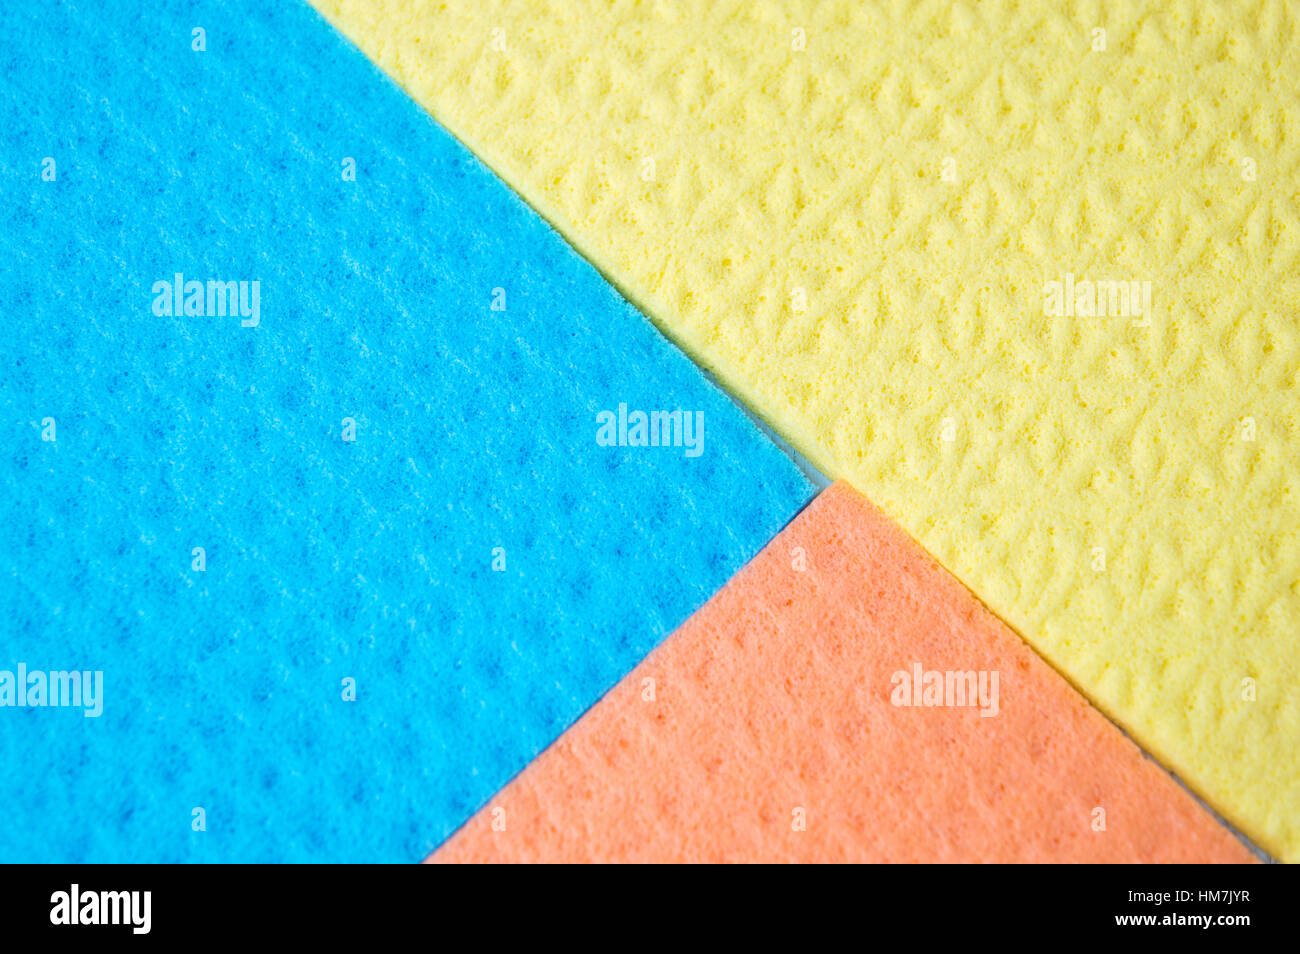 Various cleaning cloth background pattern close up Stock Photo